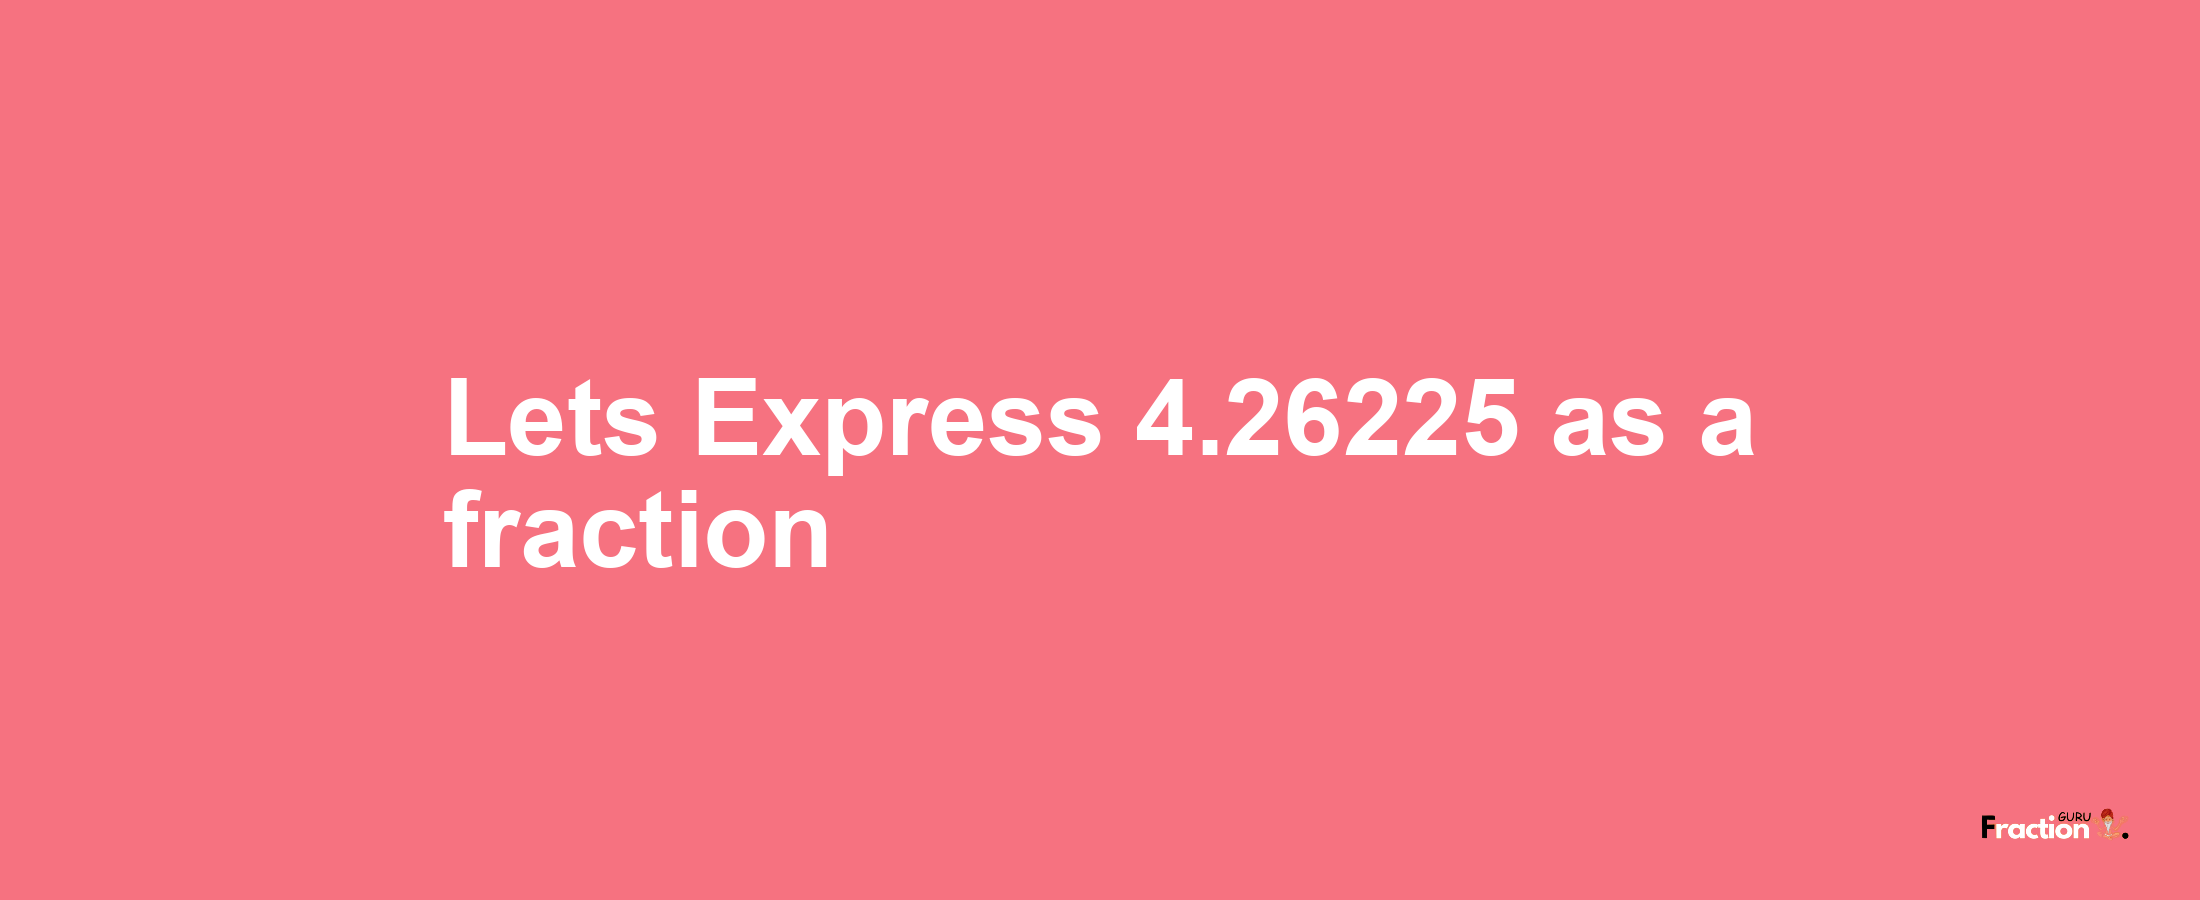 Lets Express 4.26225 as afraction